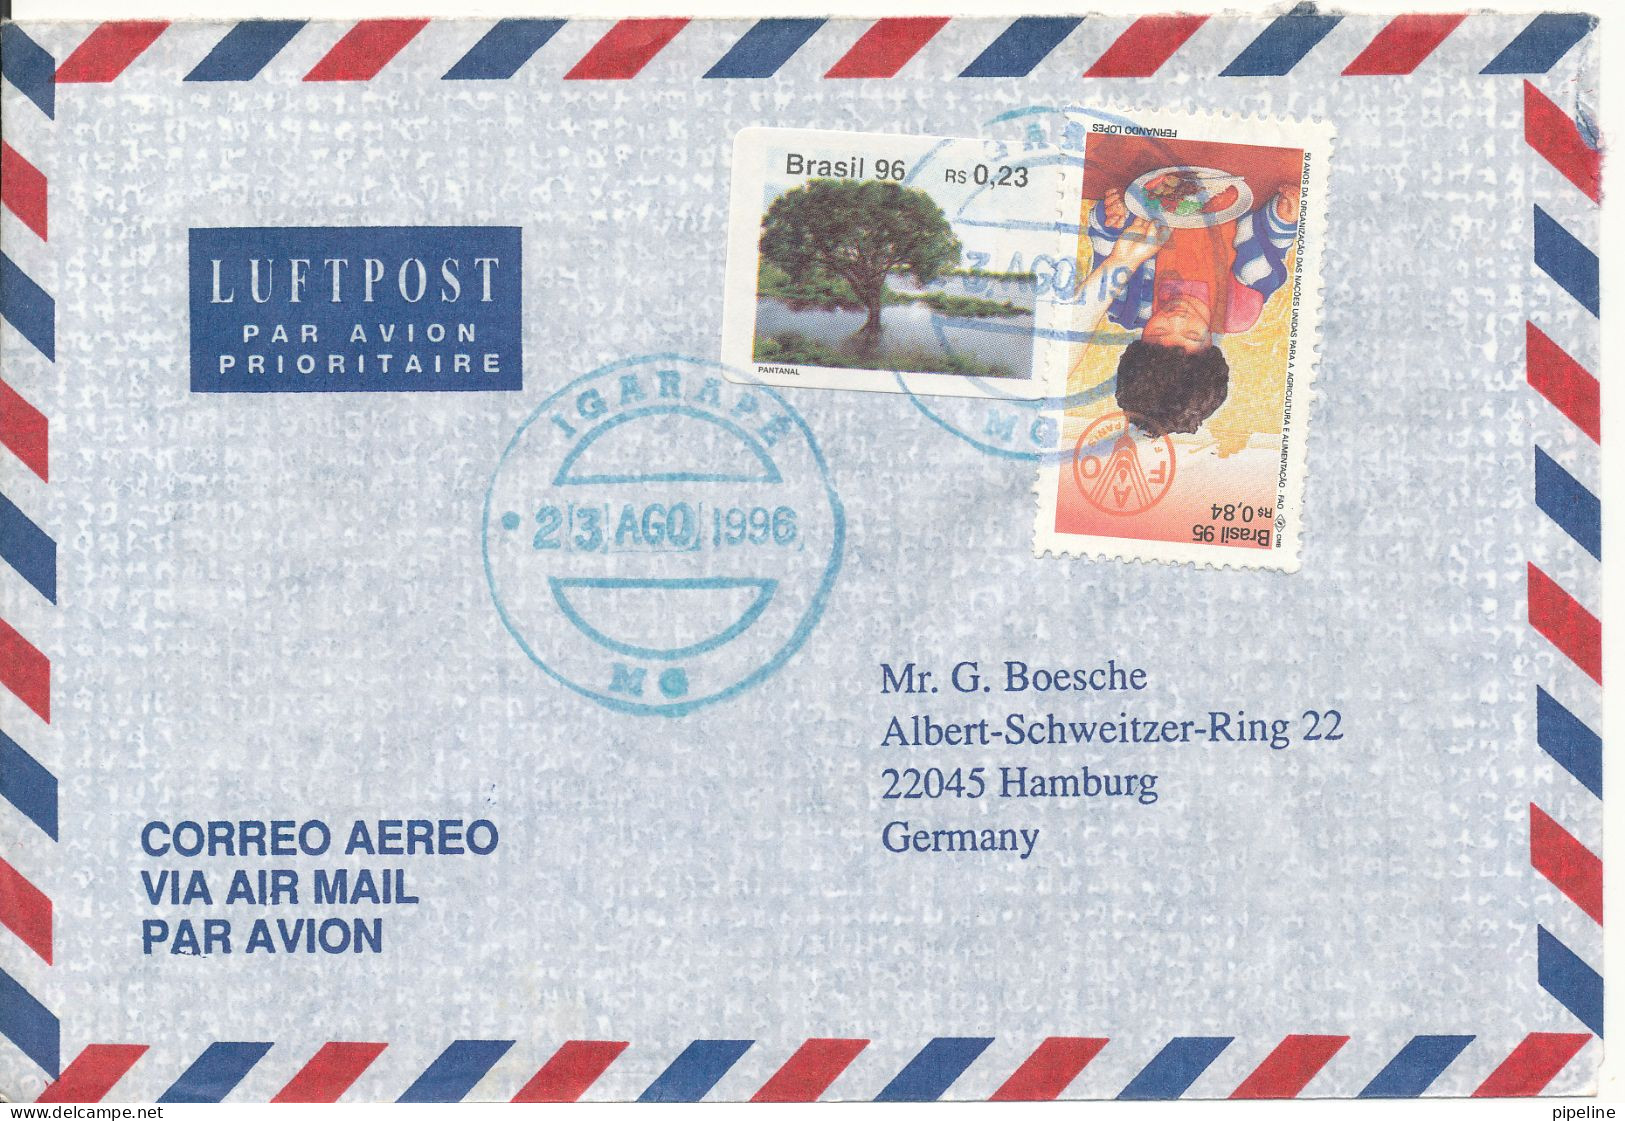 Brazil Air Mail Cover Sent To Germany 23-10-1996 Topic Stamps - Luftpost